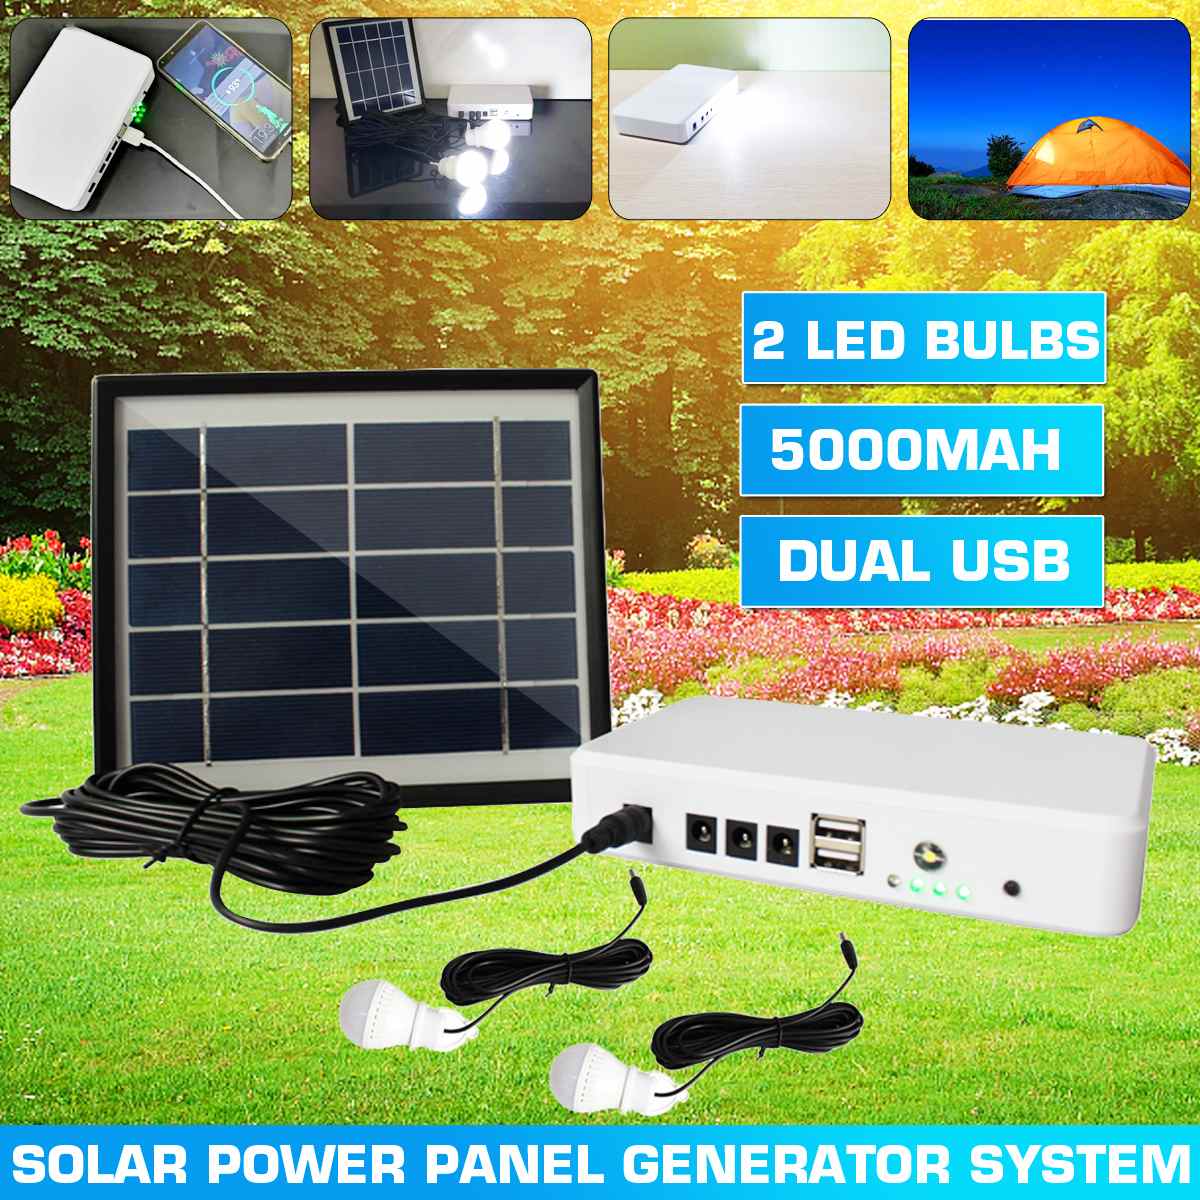 Zonnepaneel Generator Verlichting Kit Usb Solar Charger Met 2 Led Lamp Noodverlichting + 5V 1.5A Uitgang telefoon Oplader